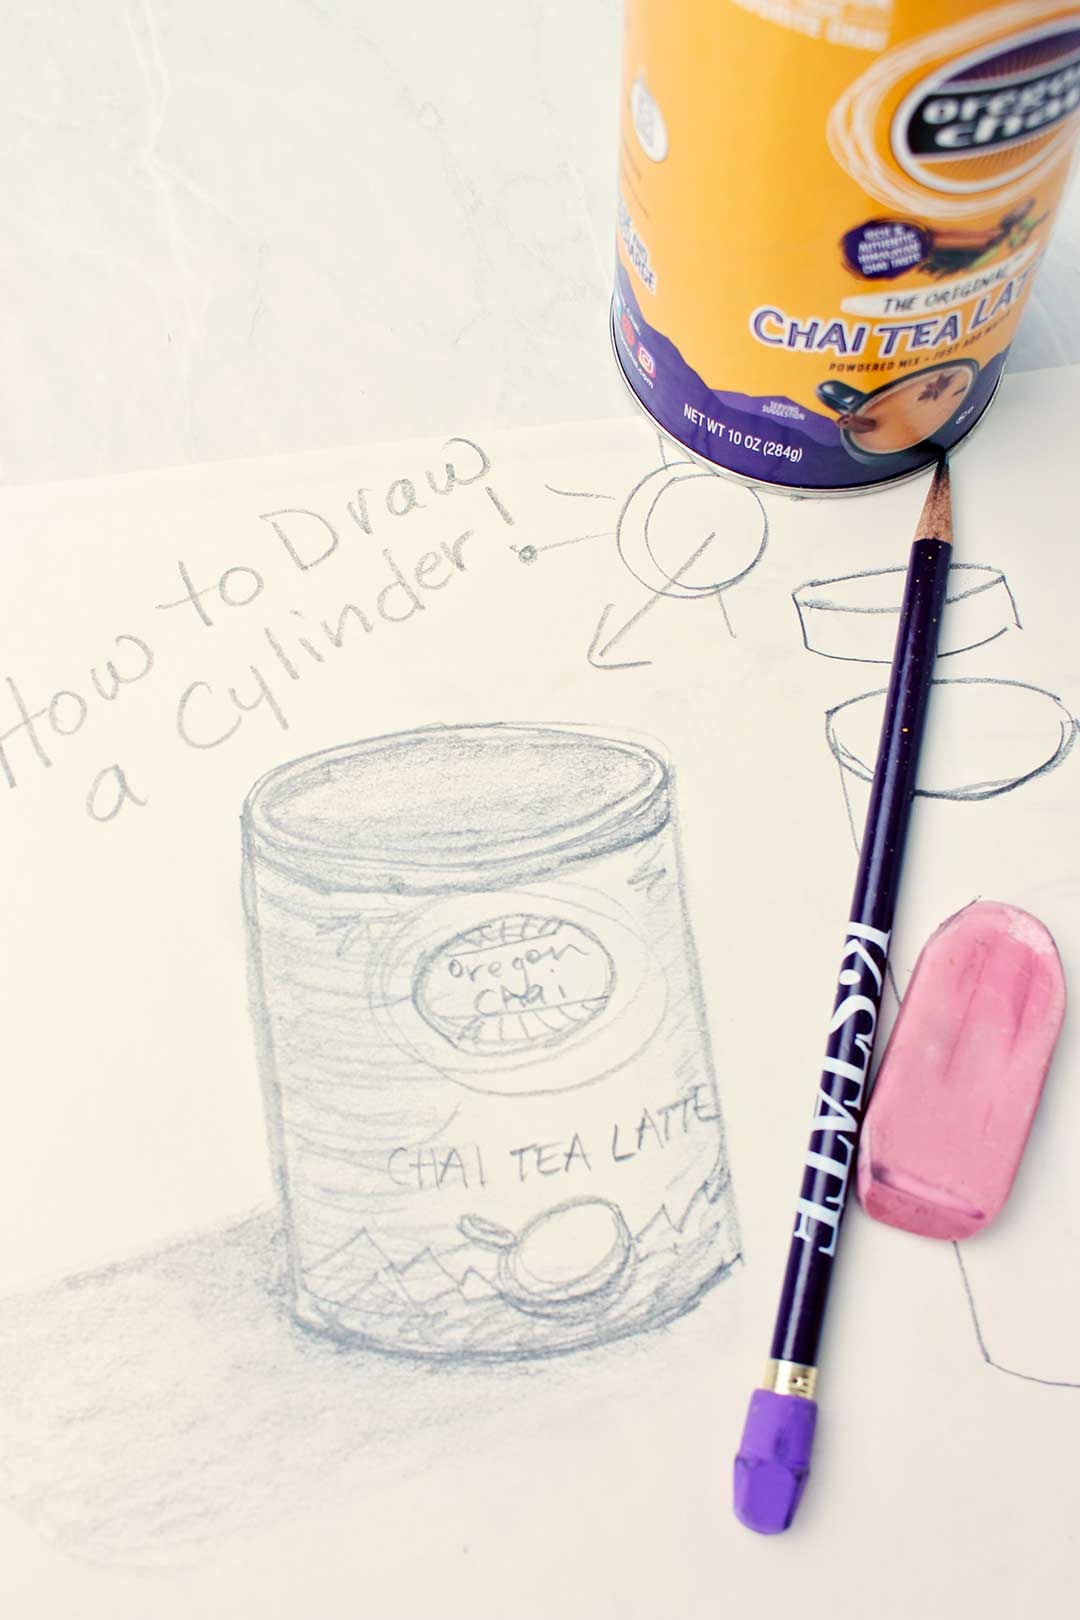 Finished drawing of a Chai Tea Latte container with pencil and pink eraser nearby.